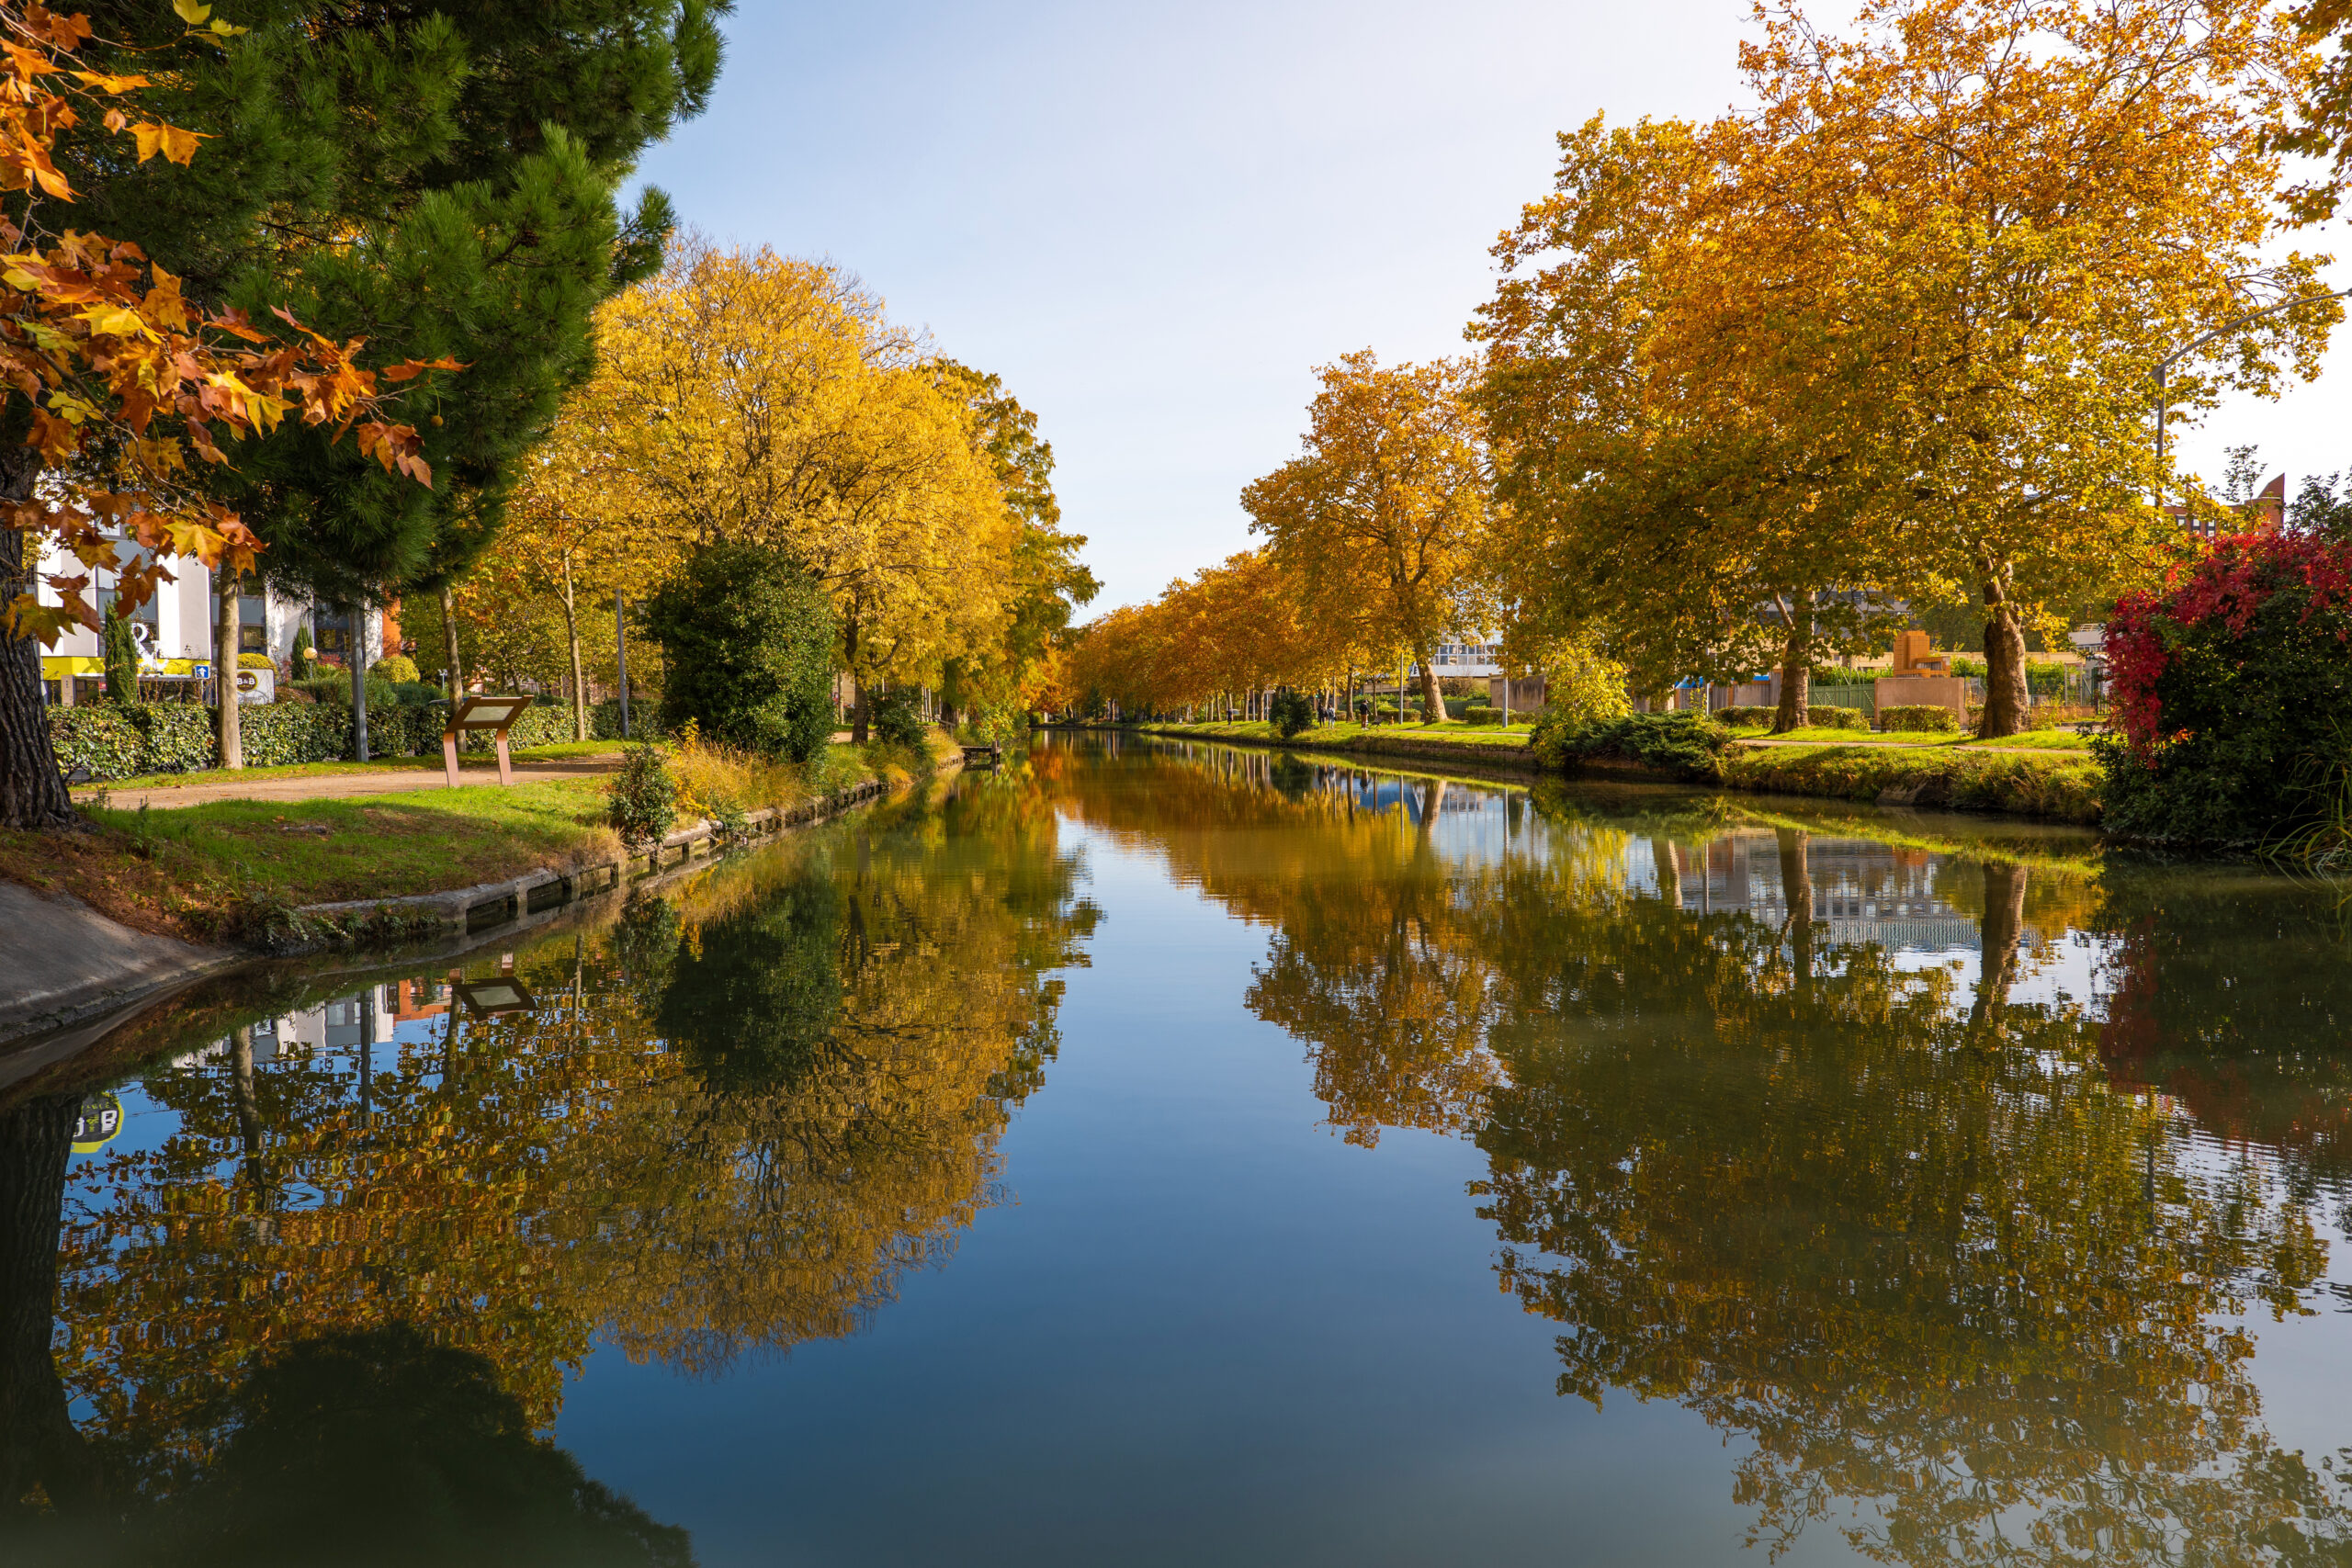 Épargne Occitanie: the canal du Midi replanting project selected by the Occitanie Region